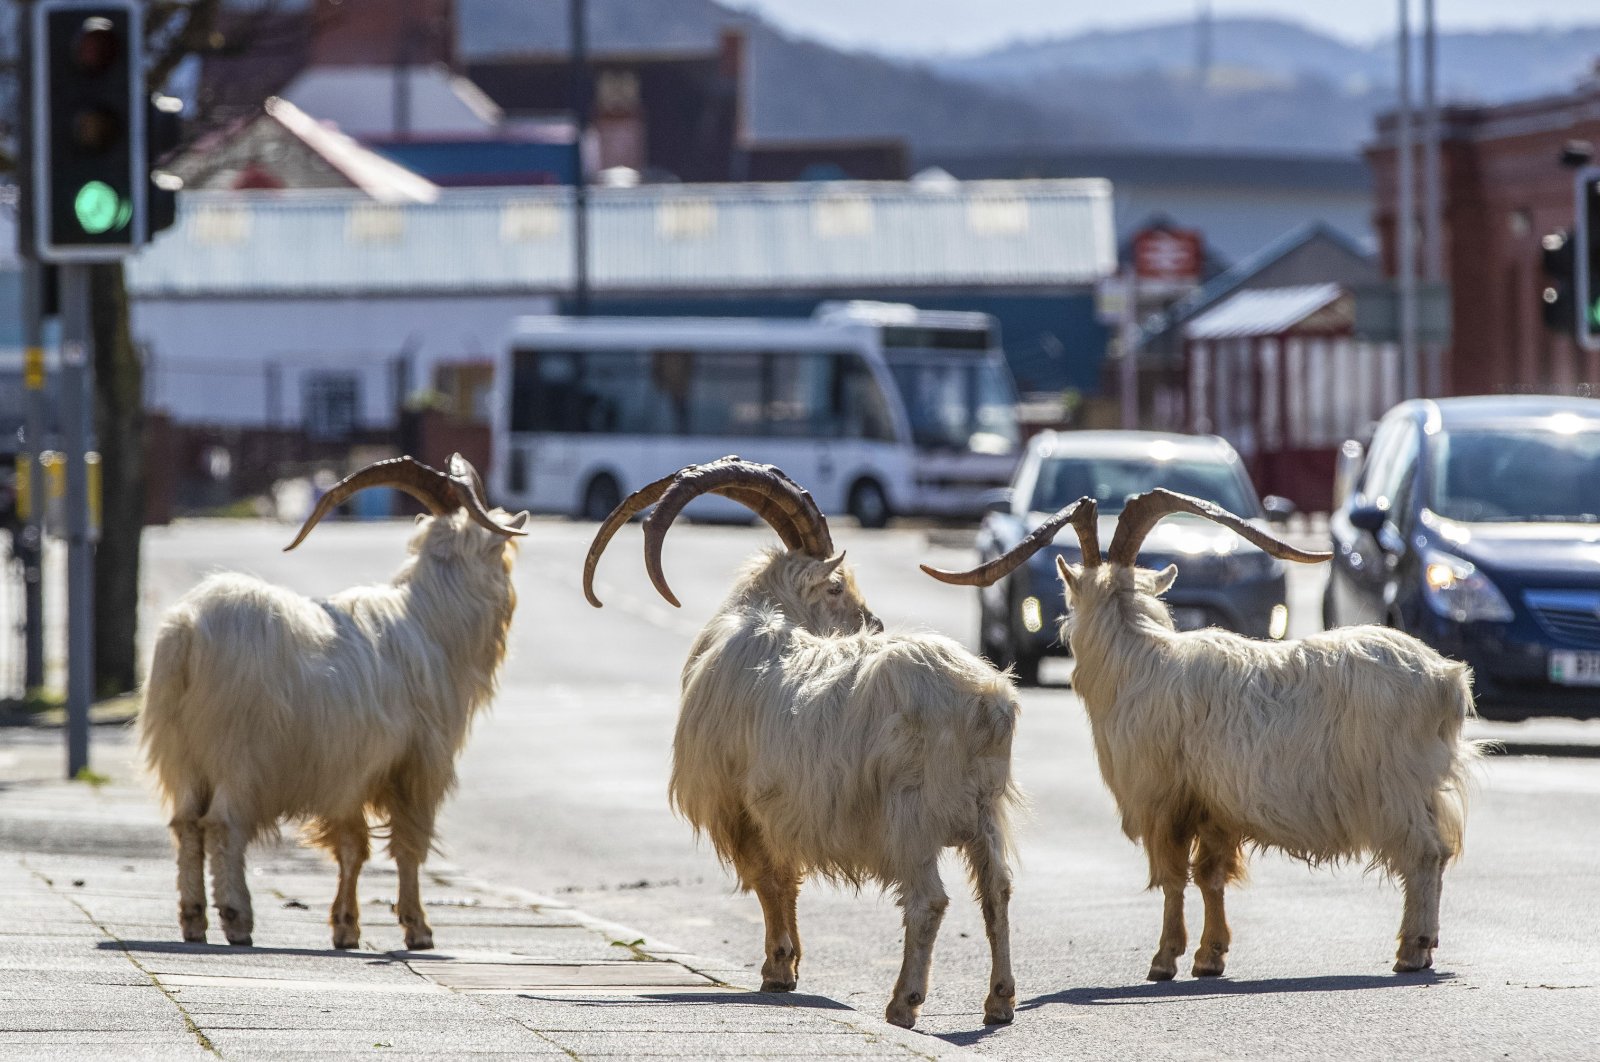 A herd of goats walk the quiet streets in Llandudno, North Wales, Tuesday, March 31, 2020. (AP Photo)